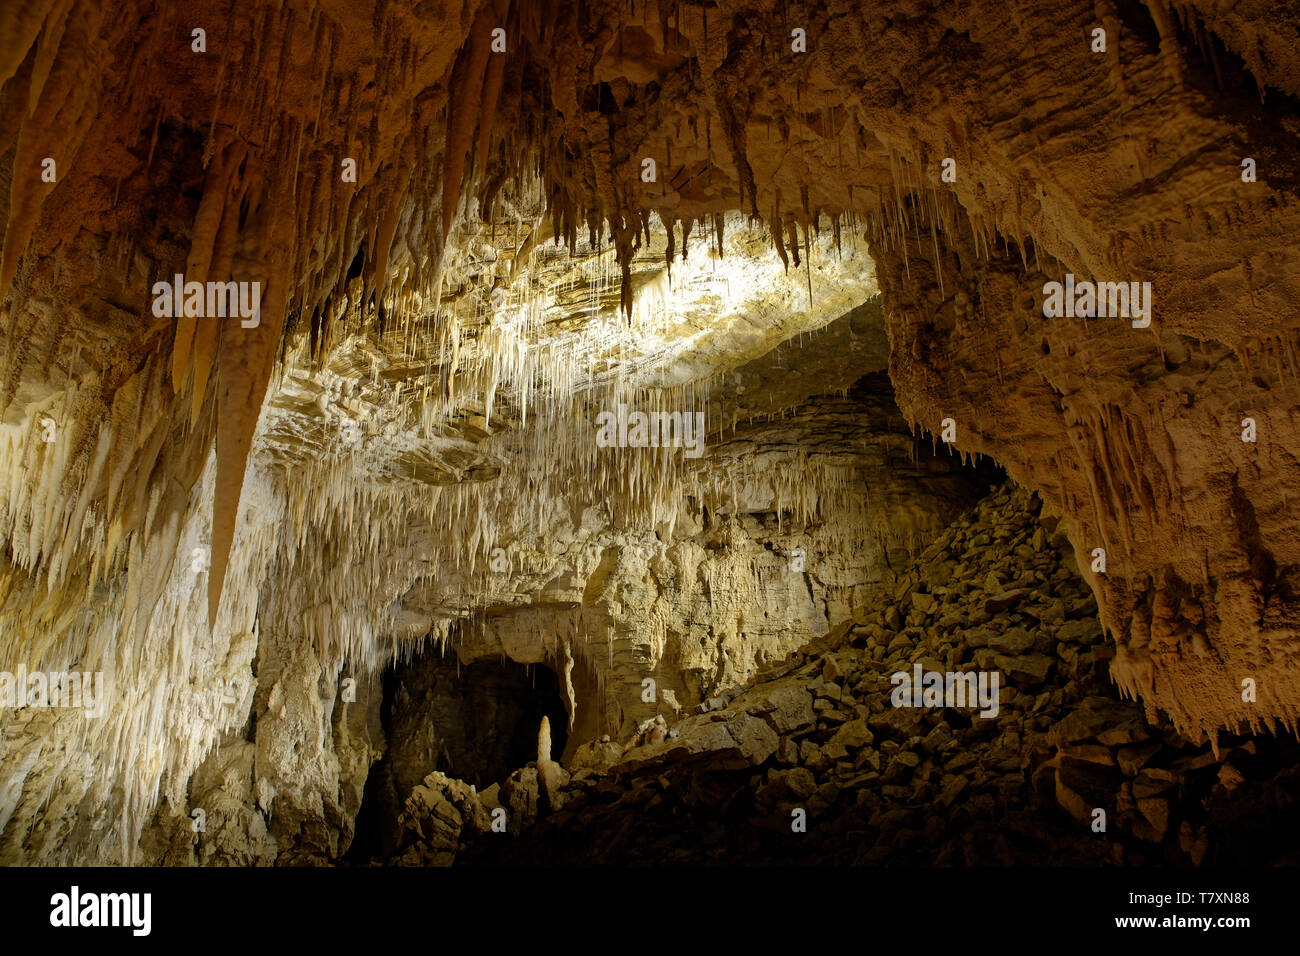 Waitomo caves, Nort Island of New Zealand, beautiful caves known for glow worms. Stock Photo